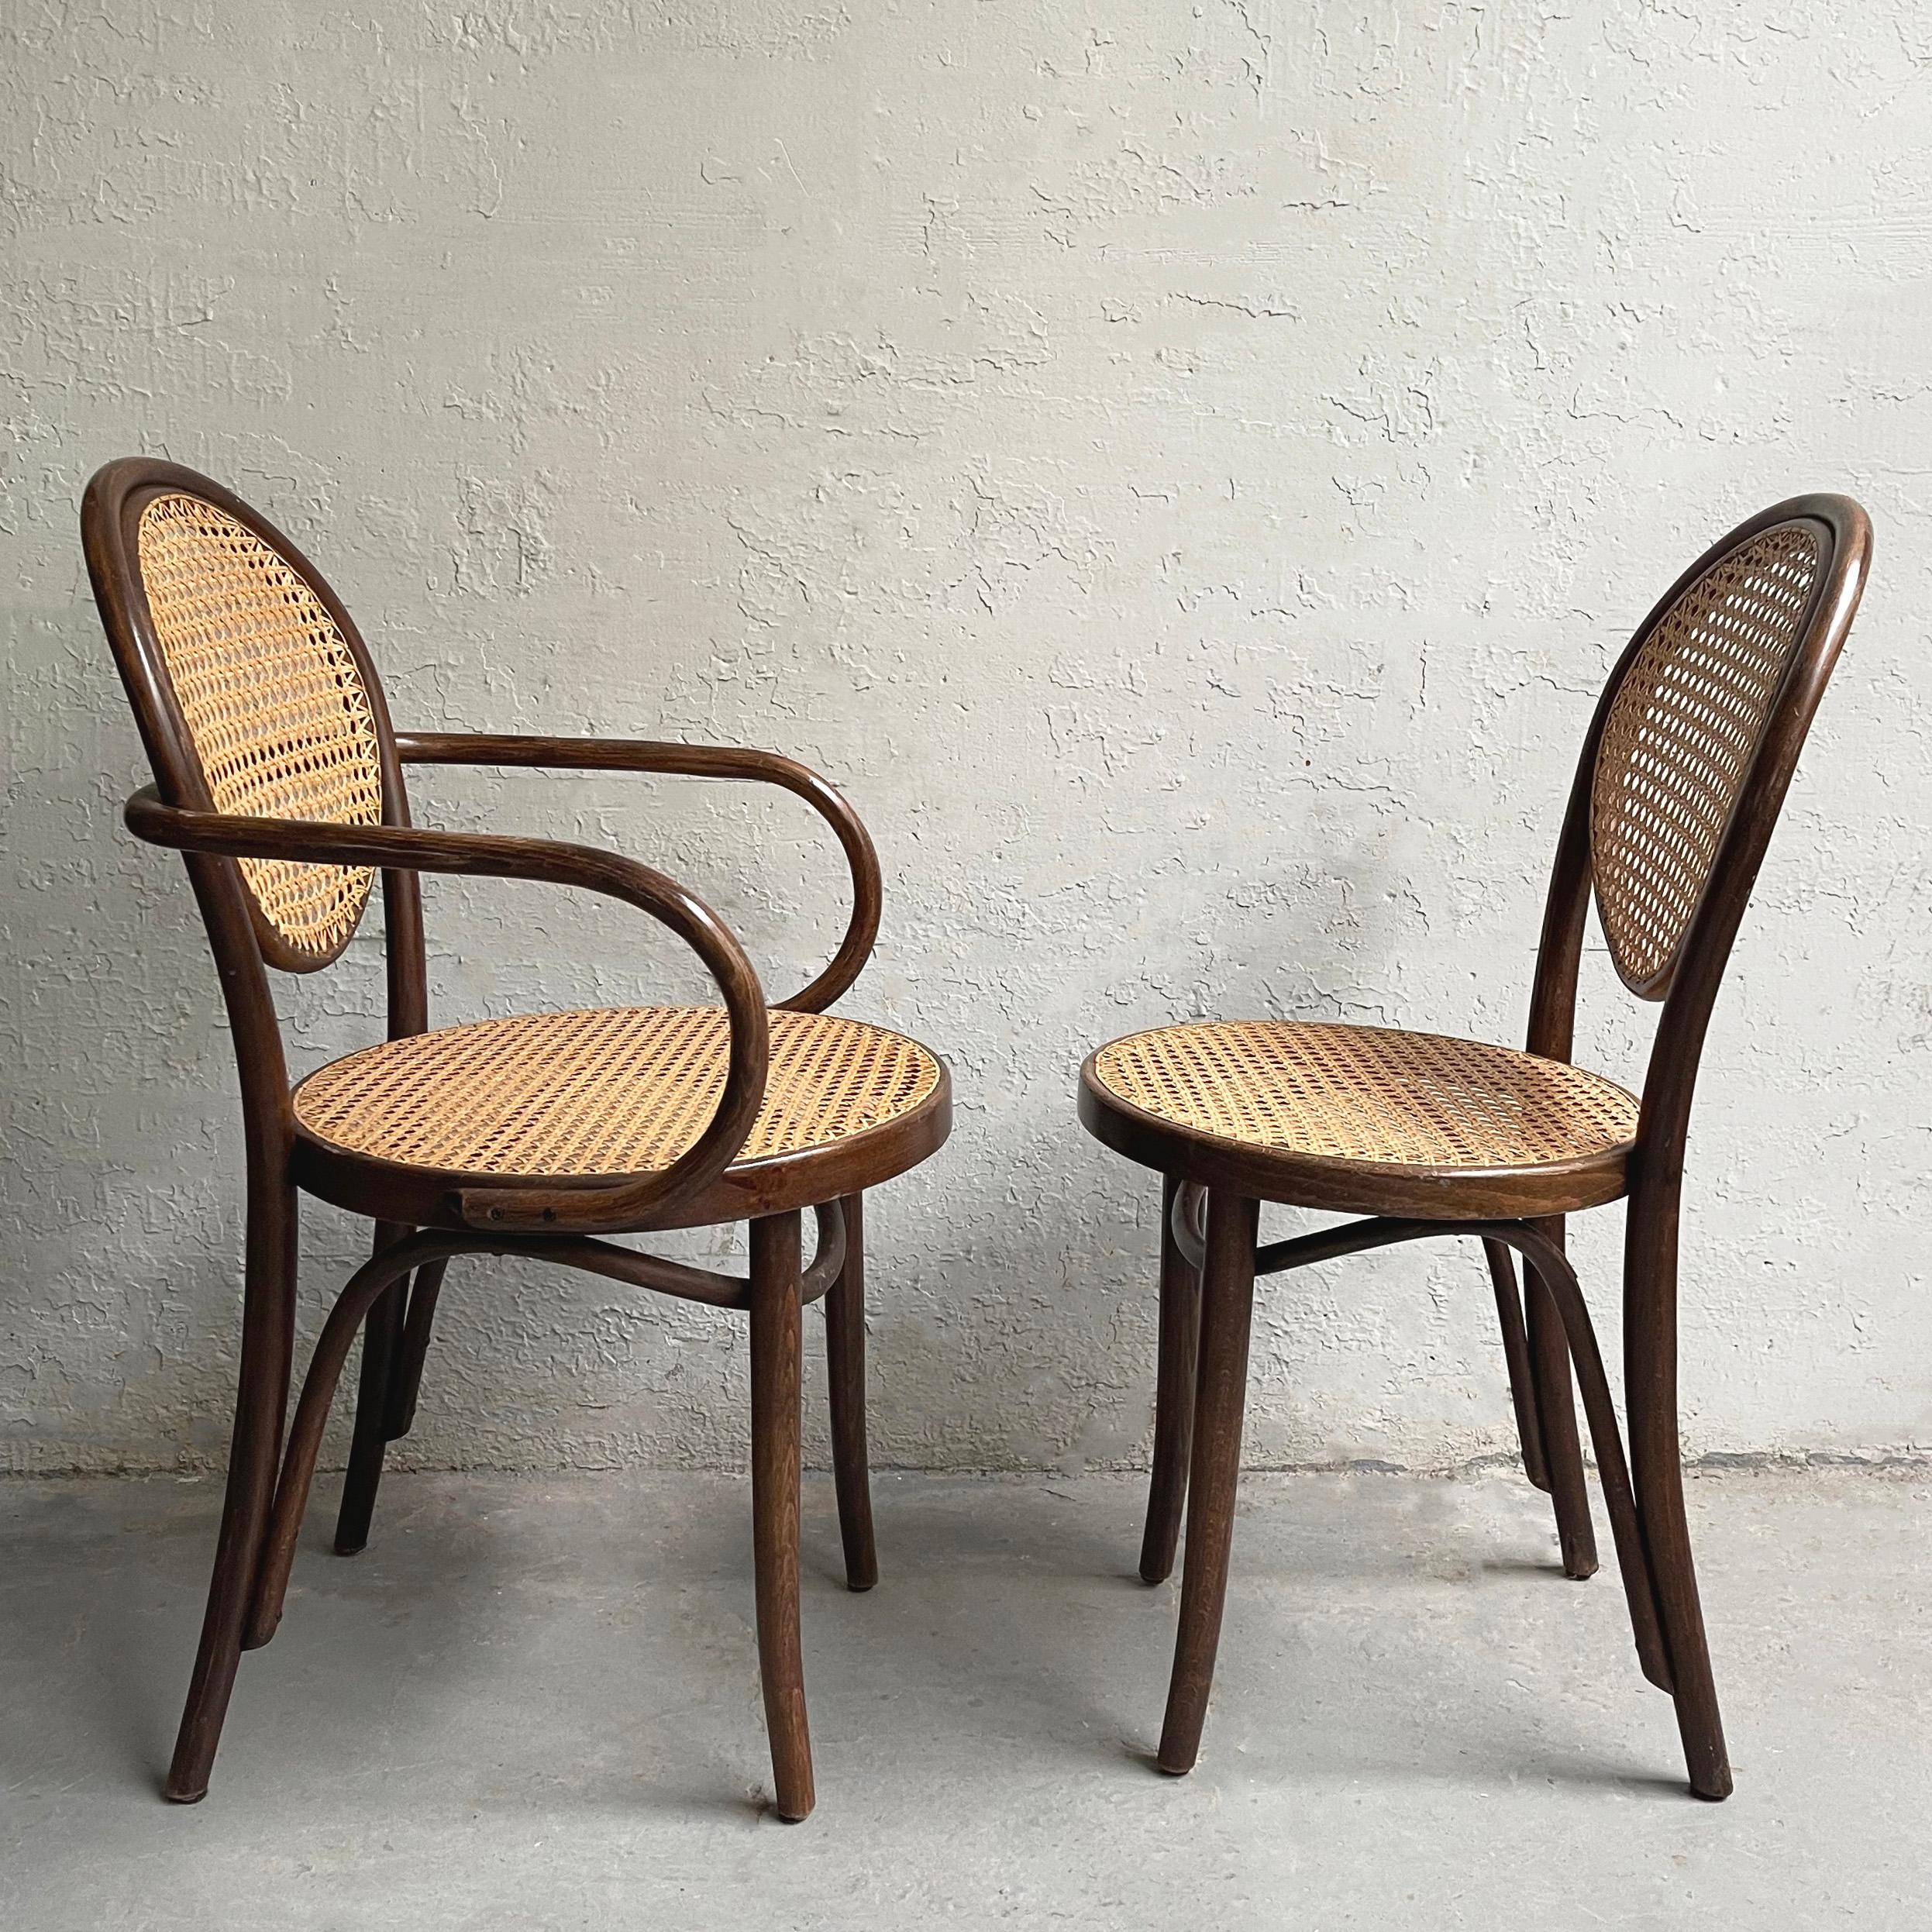 20th Century Bentwood and Cane Bistro Dining Chairs Attributed to Thonet